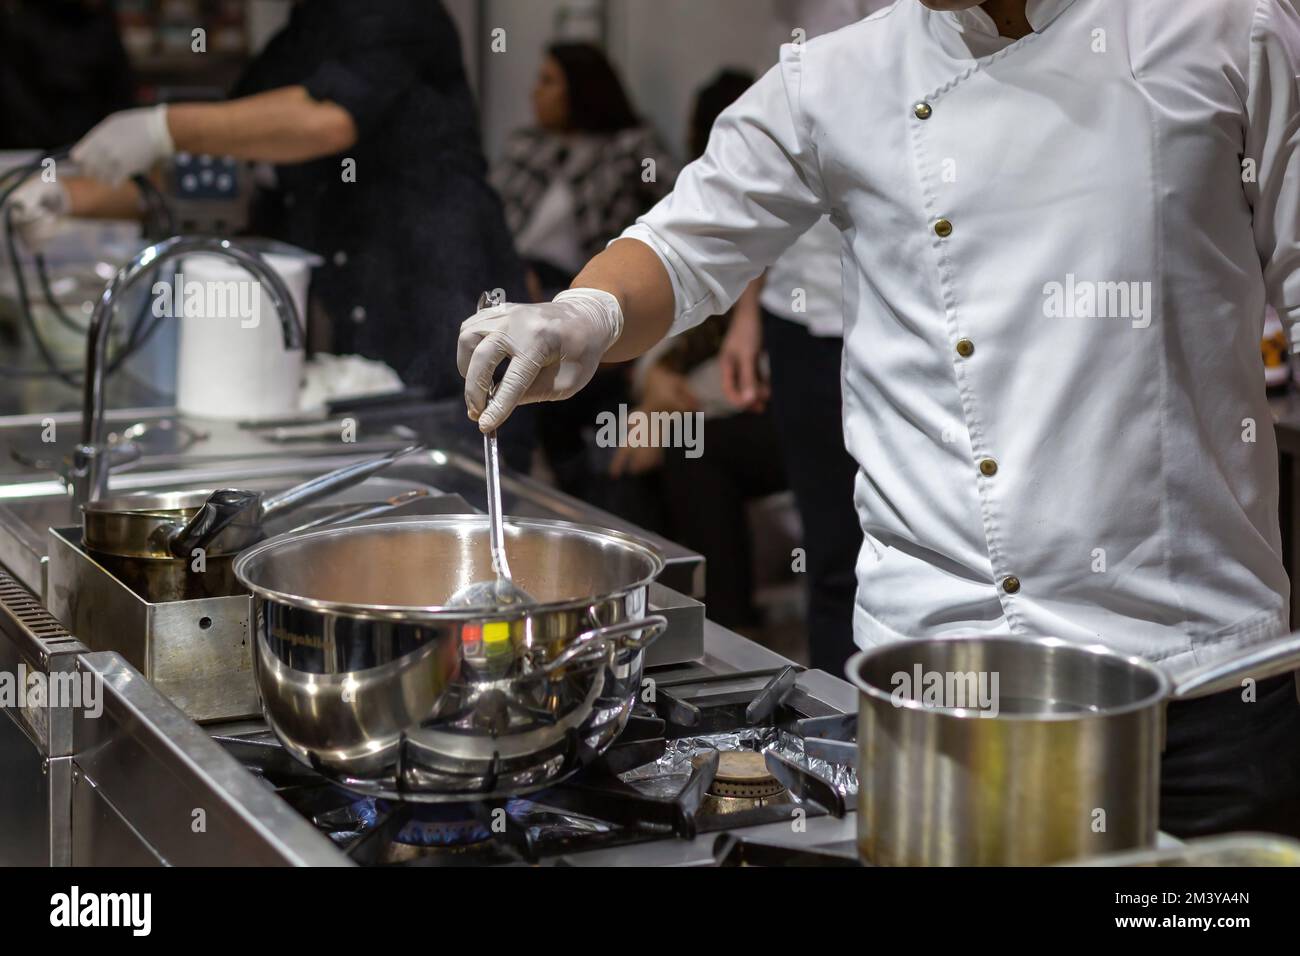 A cook stirring pots in the kitchen. Big pots in the kitchen. gastronomy education Stock Photo